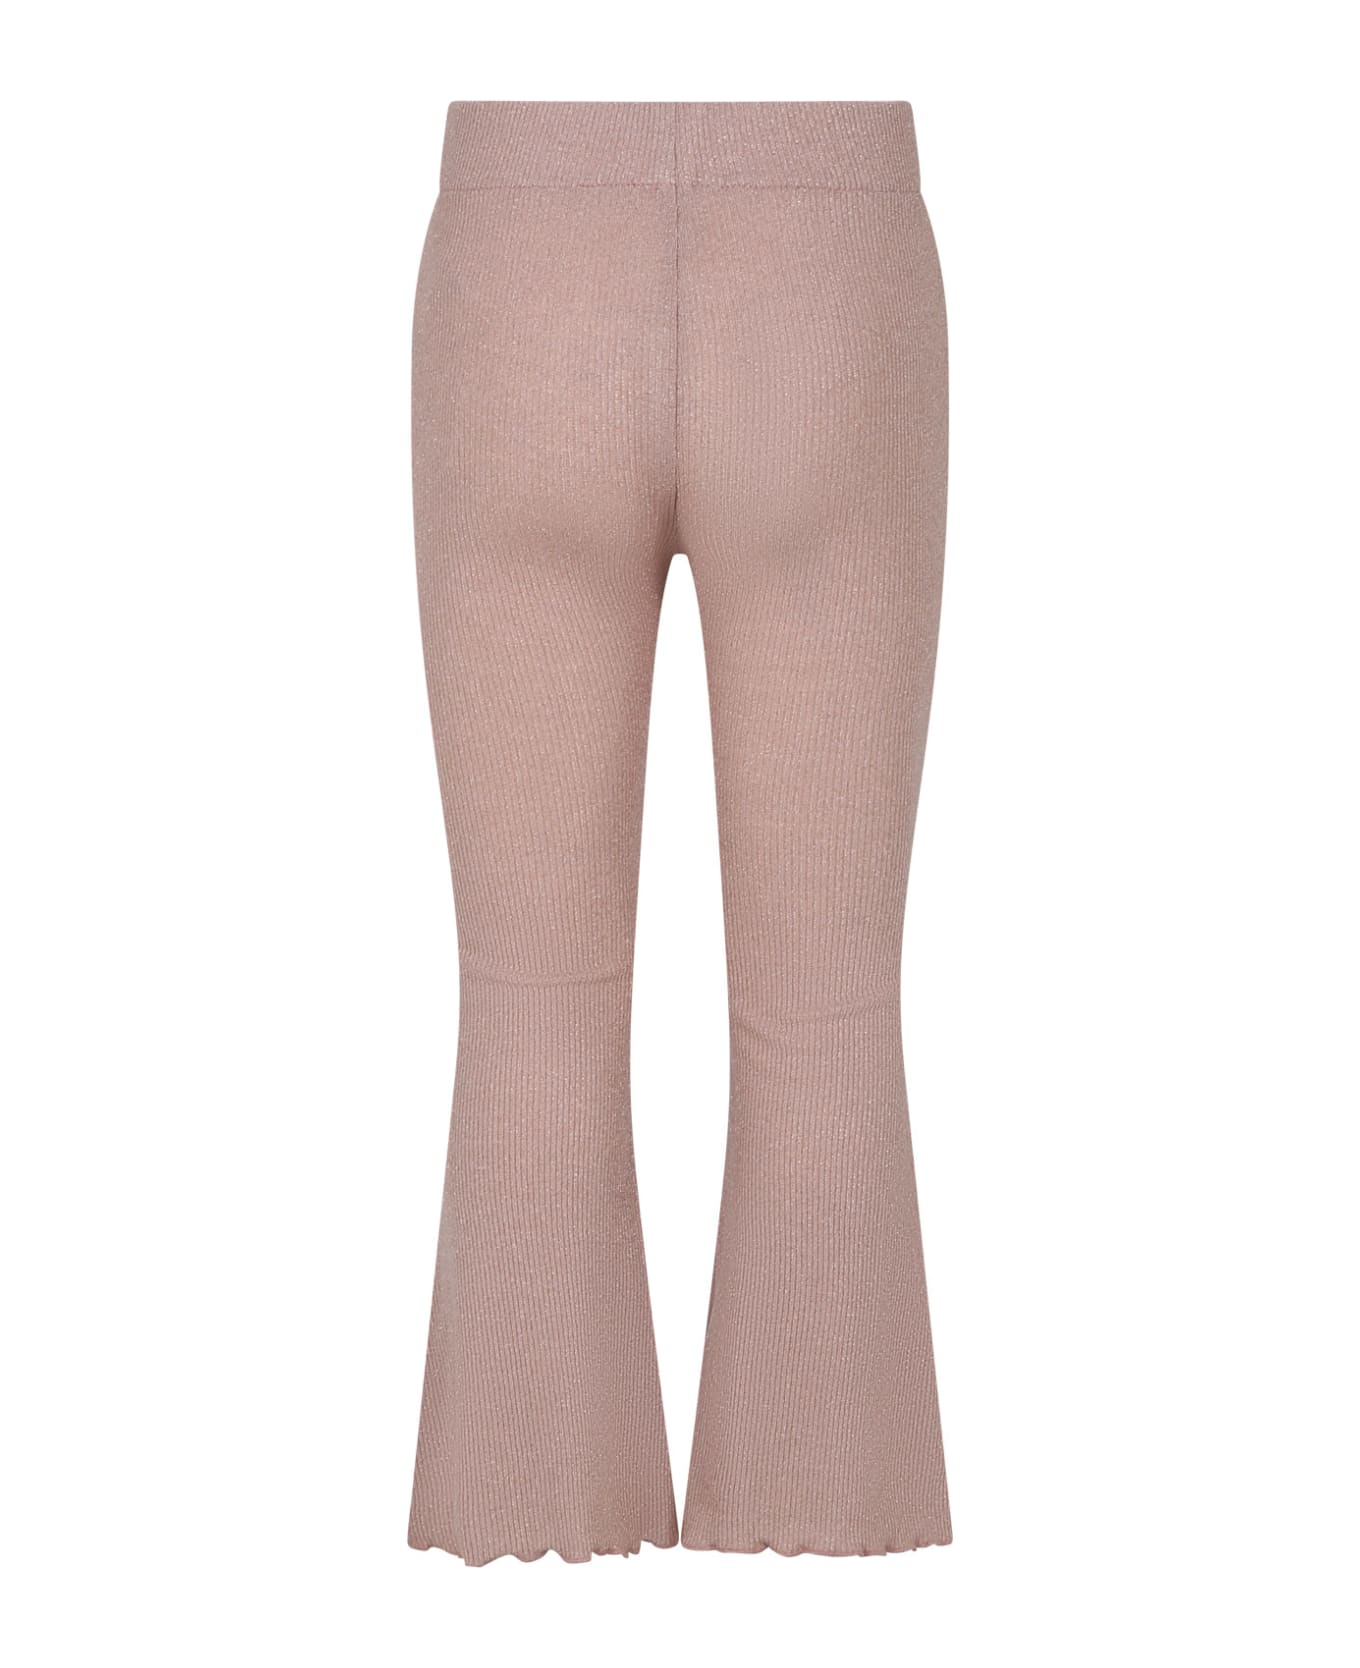 Caffe' d'Orzo Pink Trousers For Girl With Lurex - Pink ボトムス